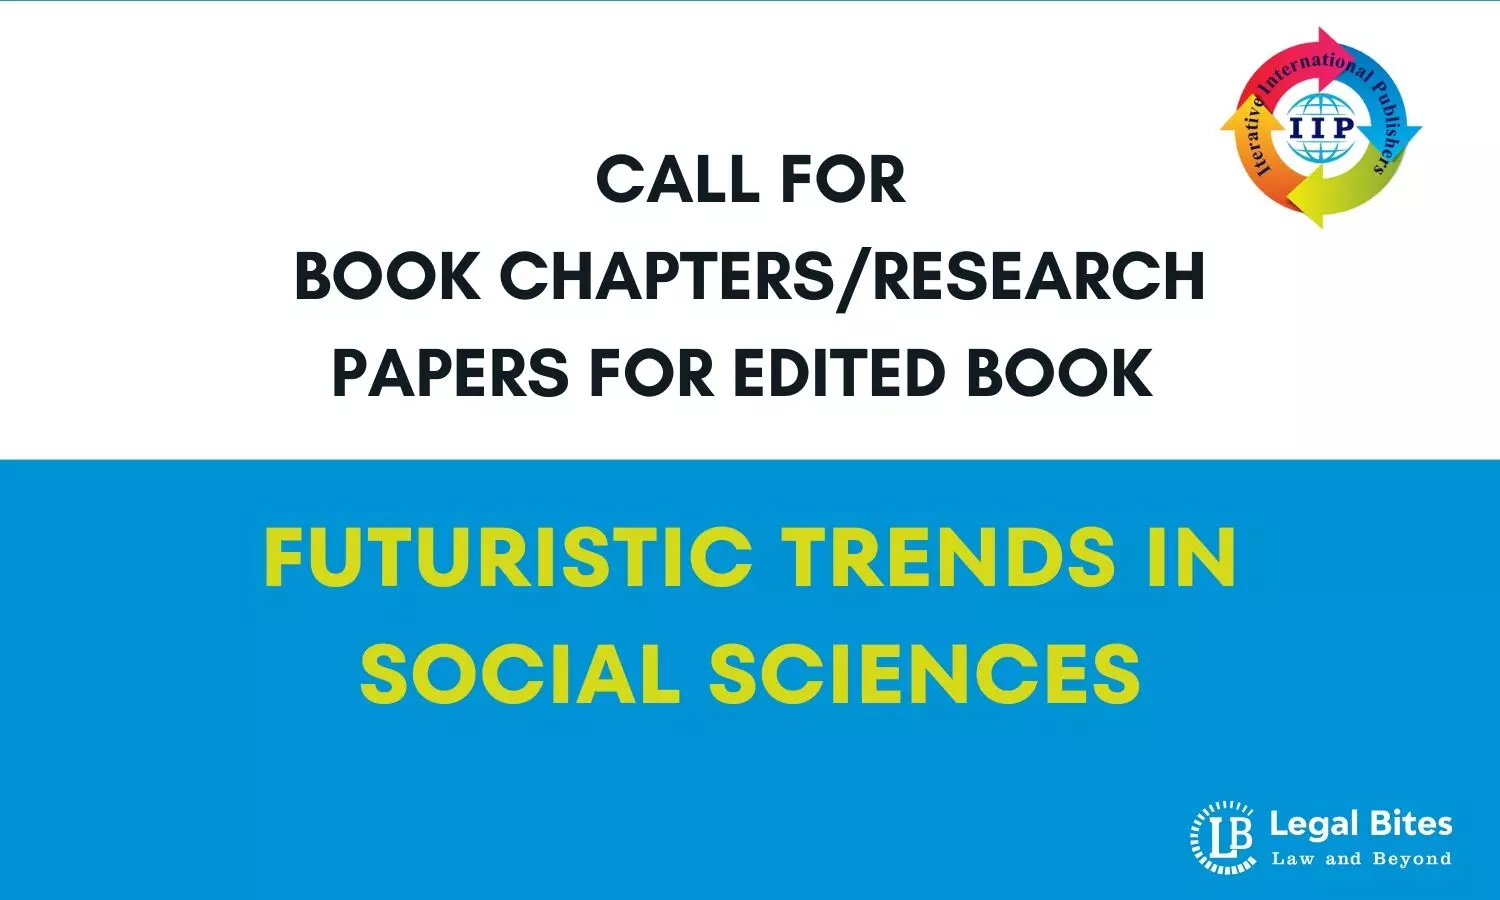 Call for Book Chapters/Research Papers for Edited Book: Futuristic Trends in Social Sciences